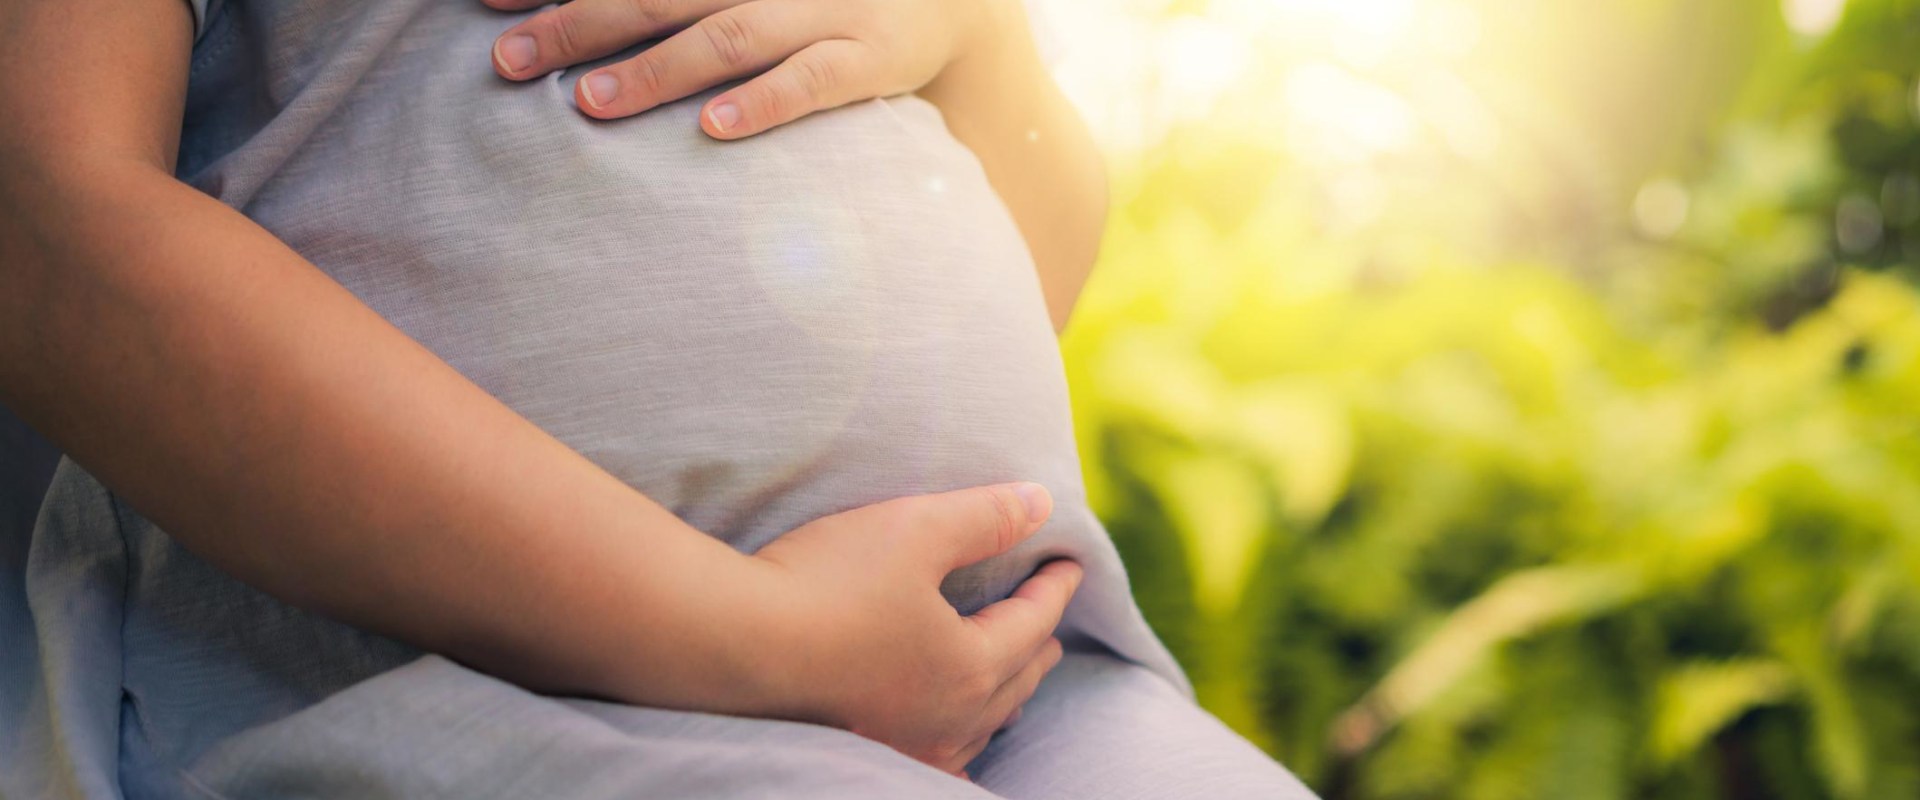 Can taking vitamin d affect pregnancy?